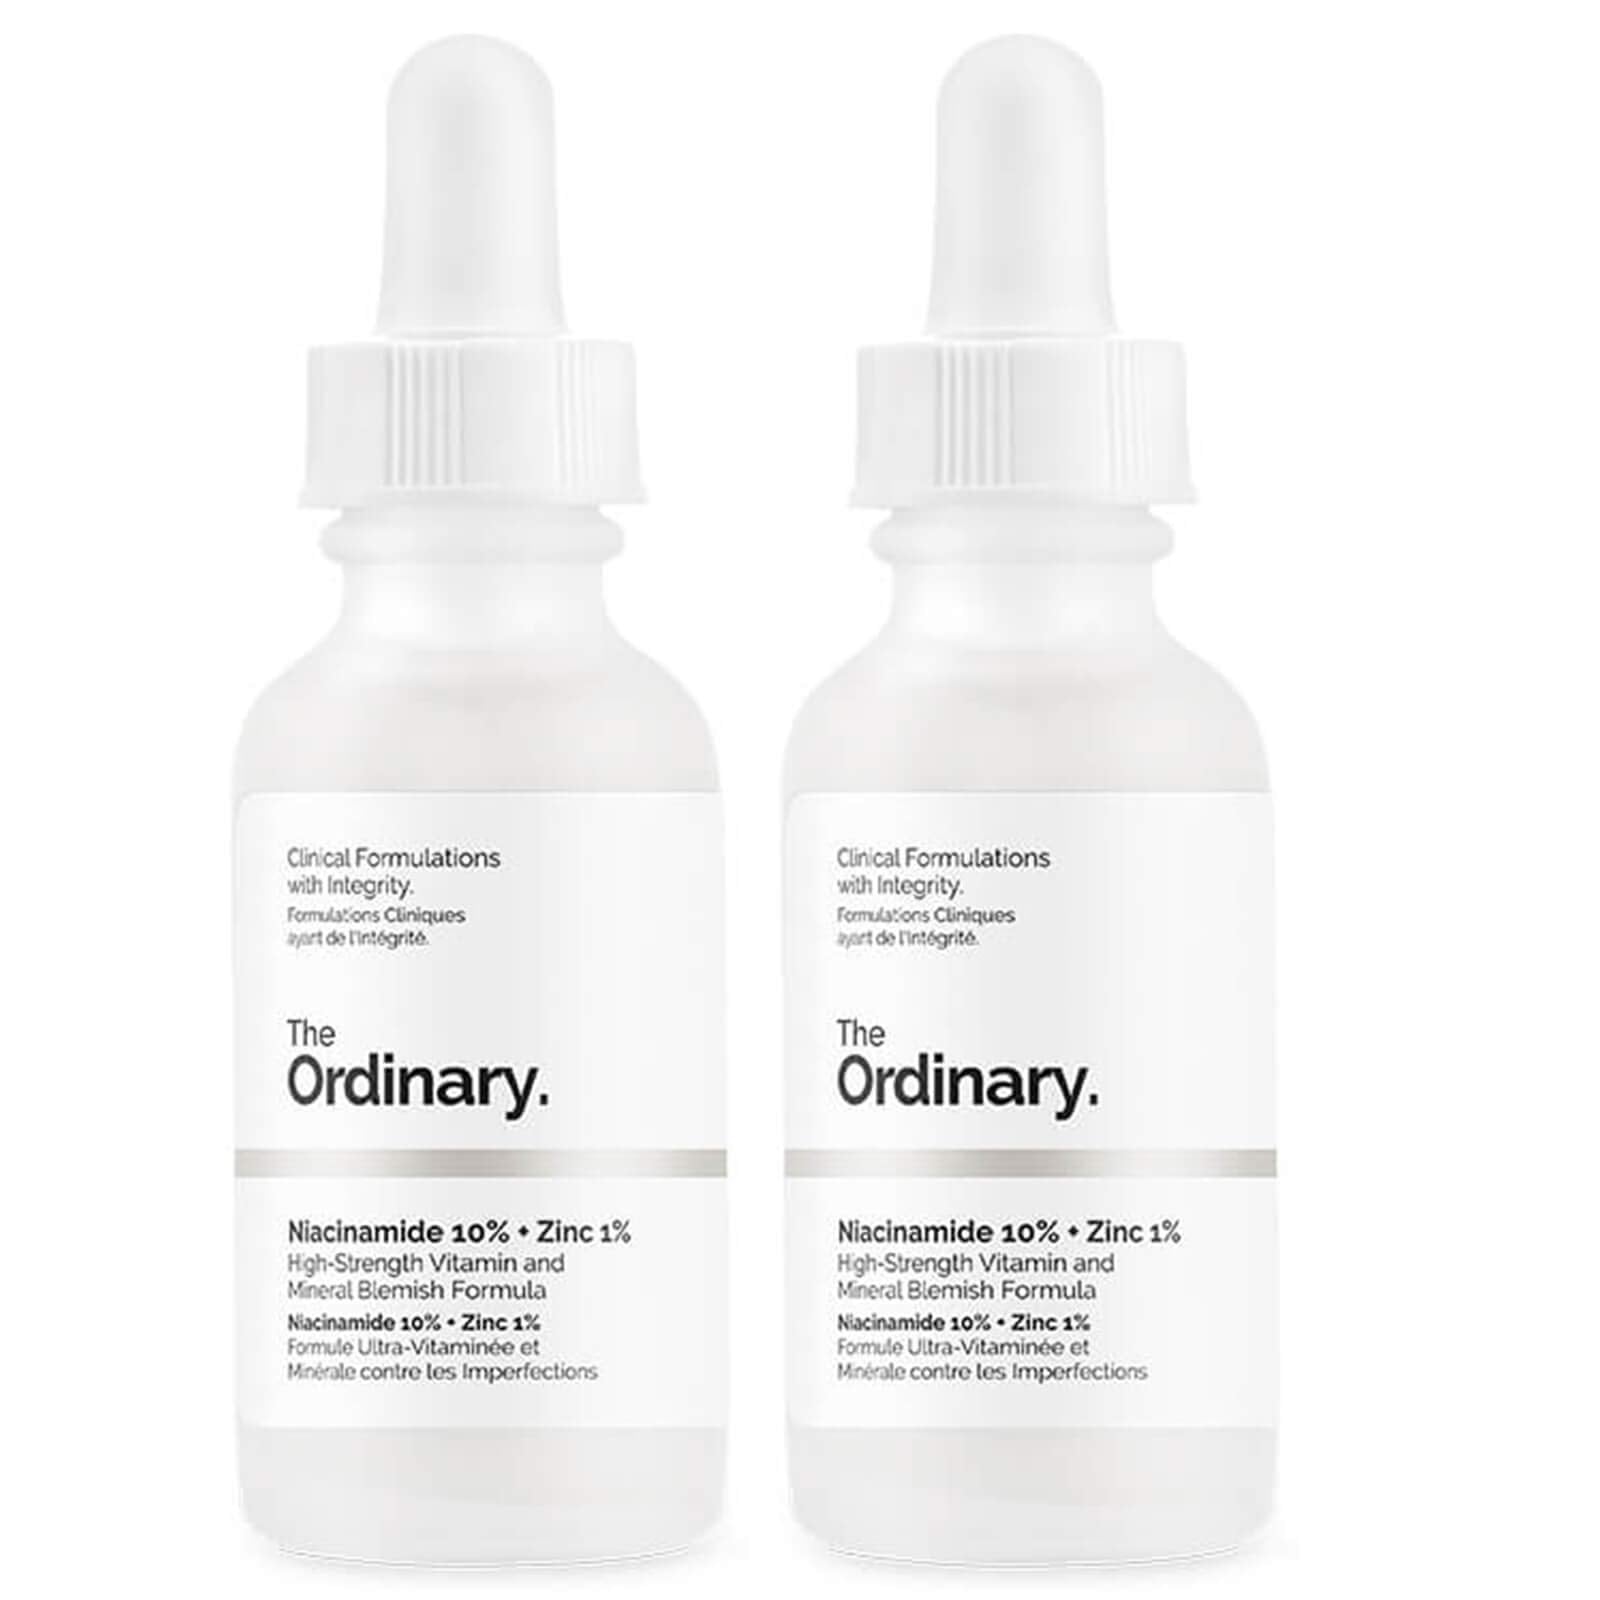 2X 'The Ordinary'. Niacinamide 10% + Zinc 1%. Serum ANTIROJECES 30 ml, Clinical Formulations with Integrity.